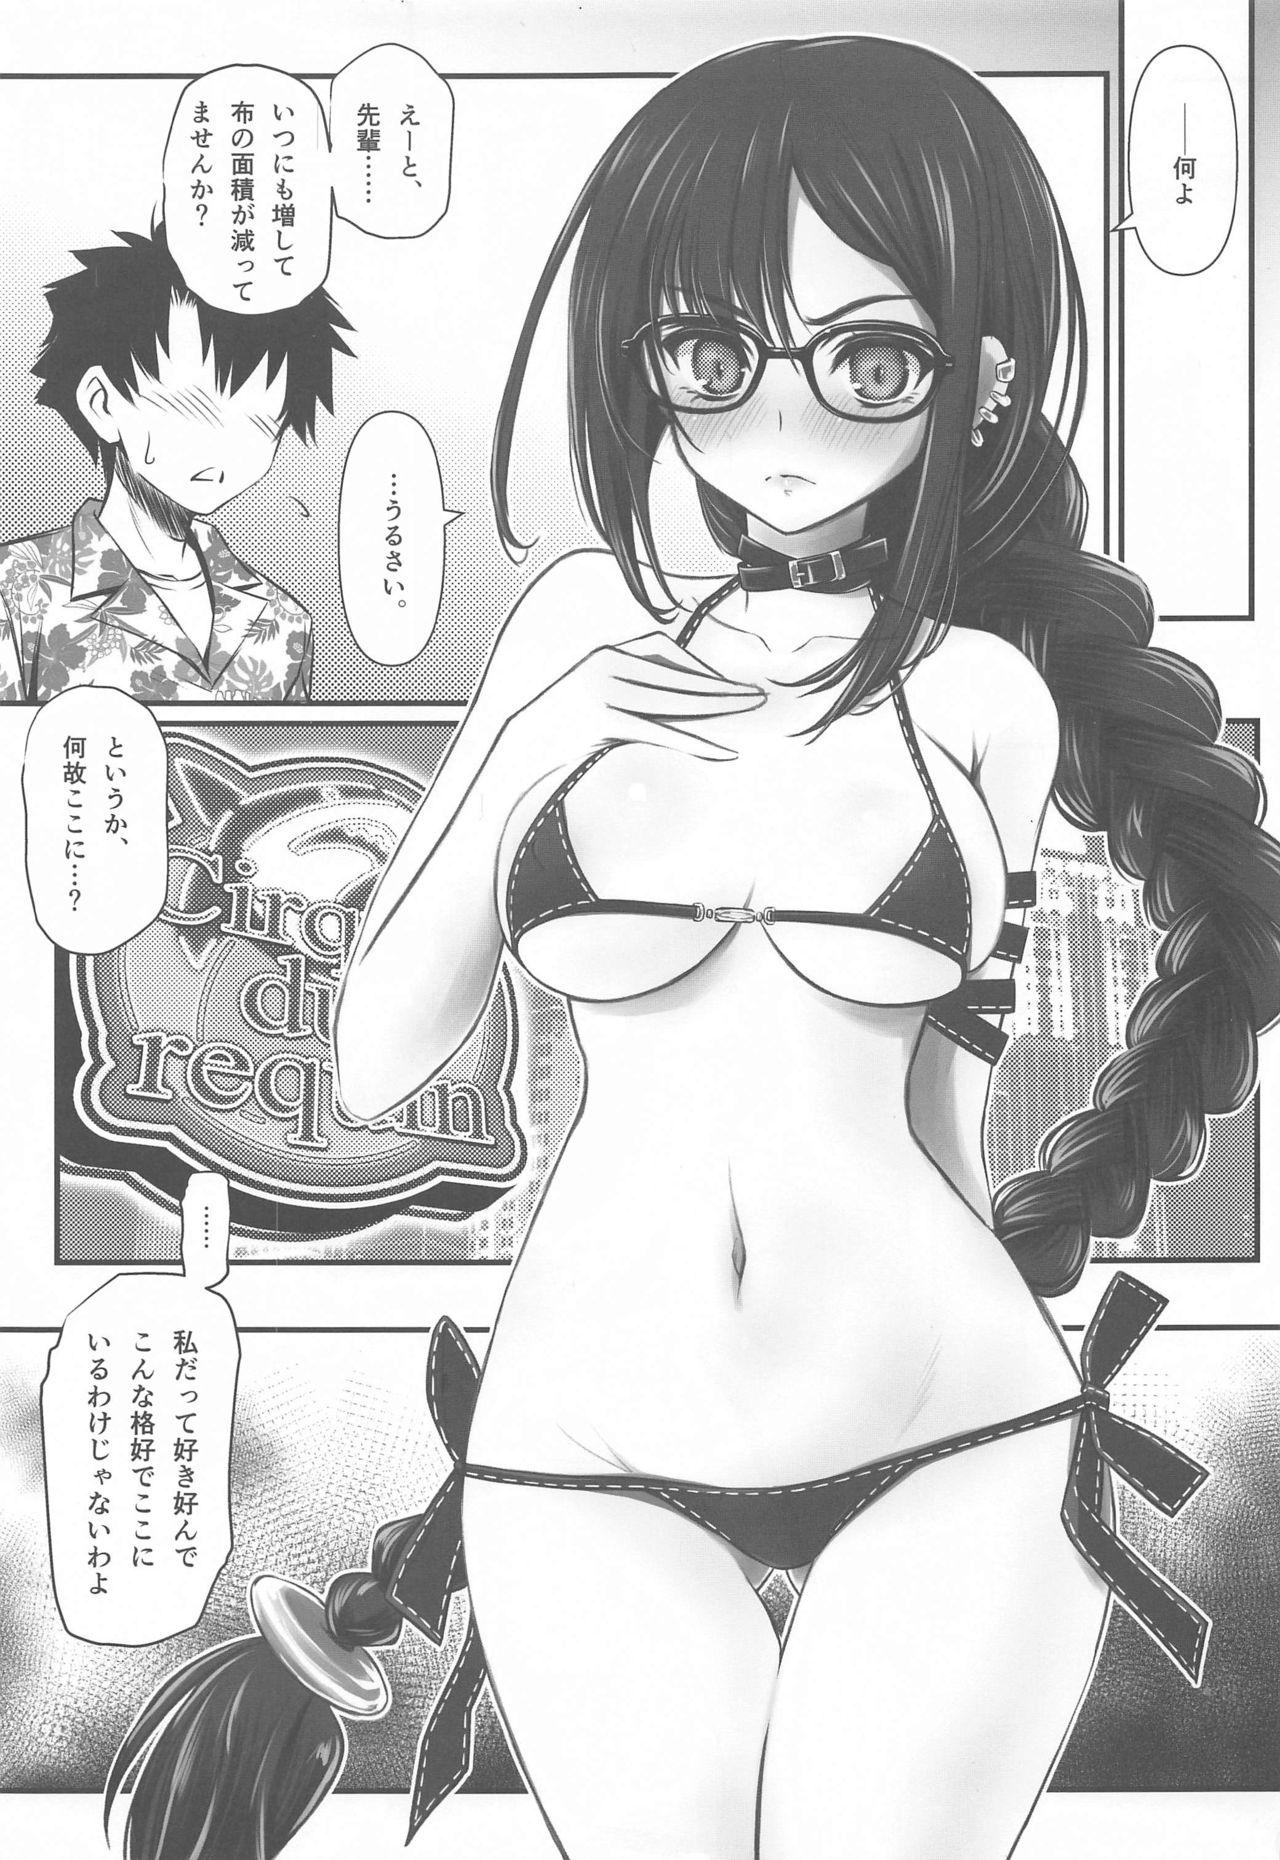 First Time [Yakan Honpo (Inoue Tommy)] Megane Senpai Onee-chan - FGO Cute Glasses Sister(s) (Fate/Grand Order) - Fate grand order Underwear - Page 2